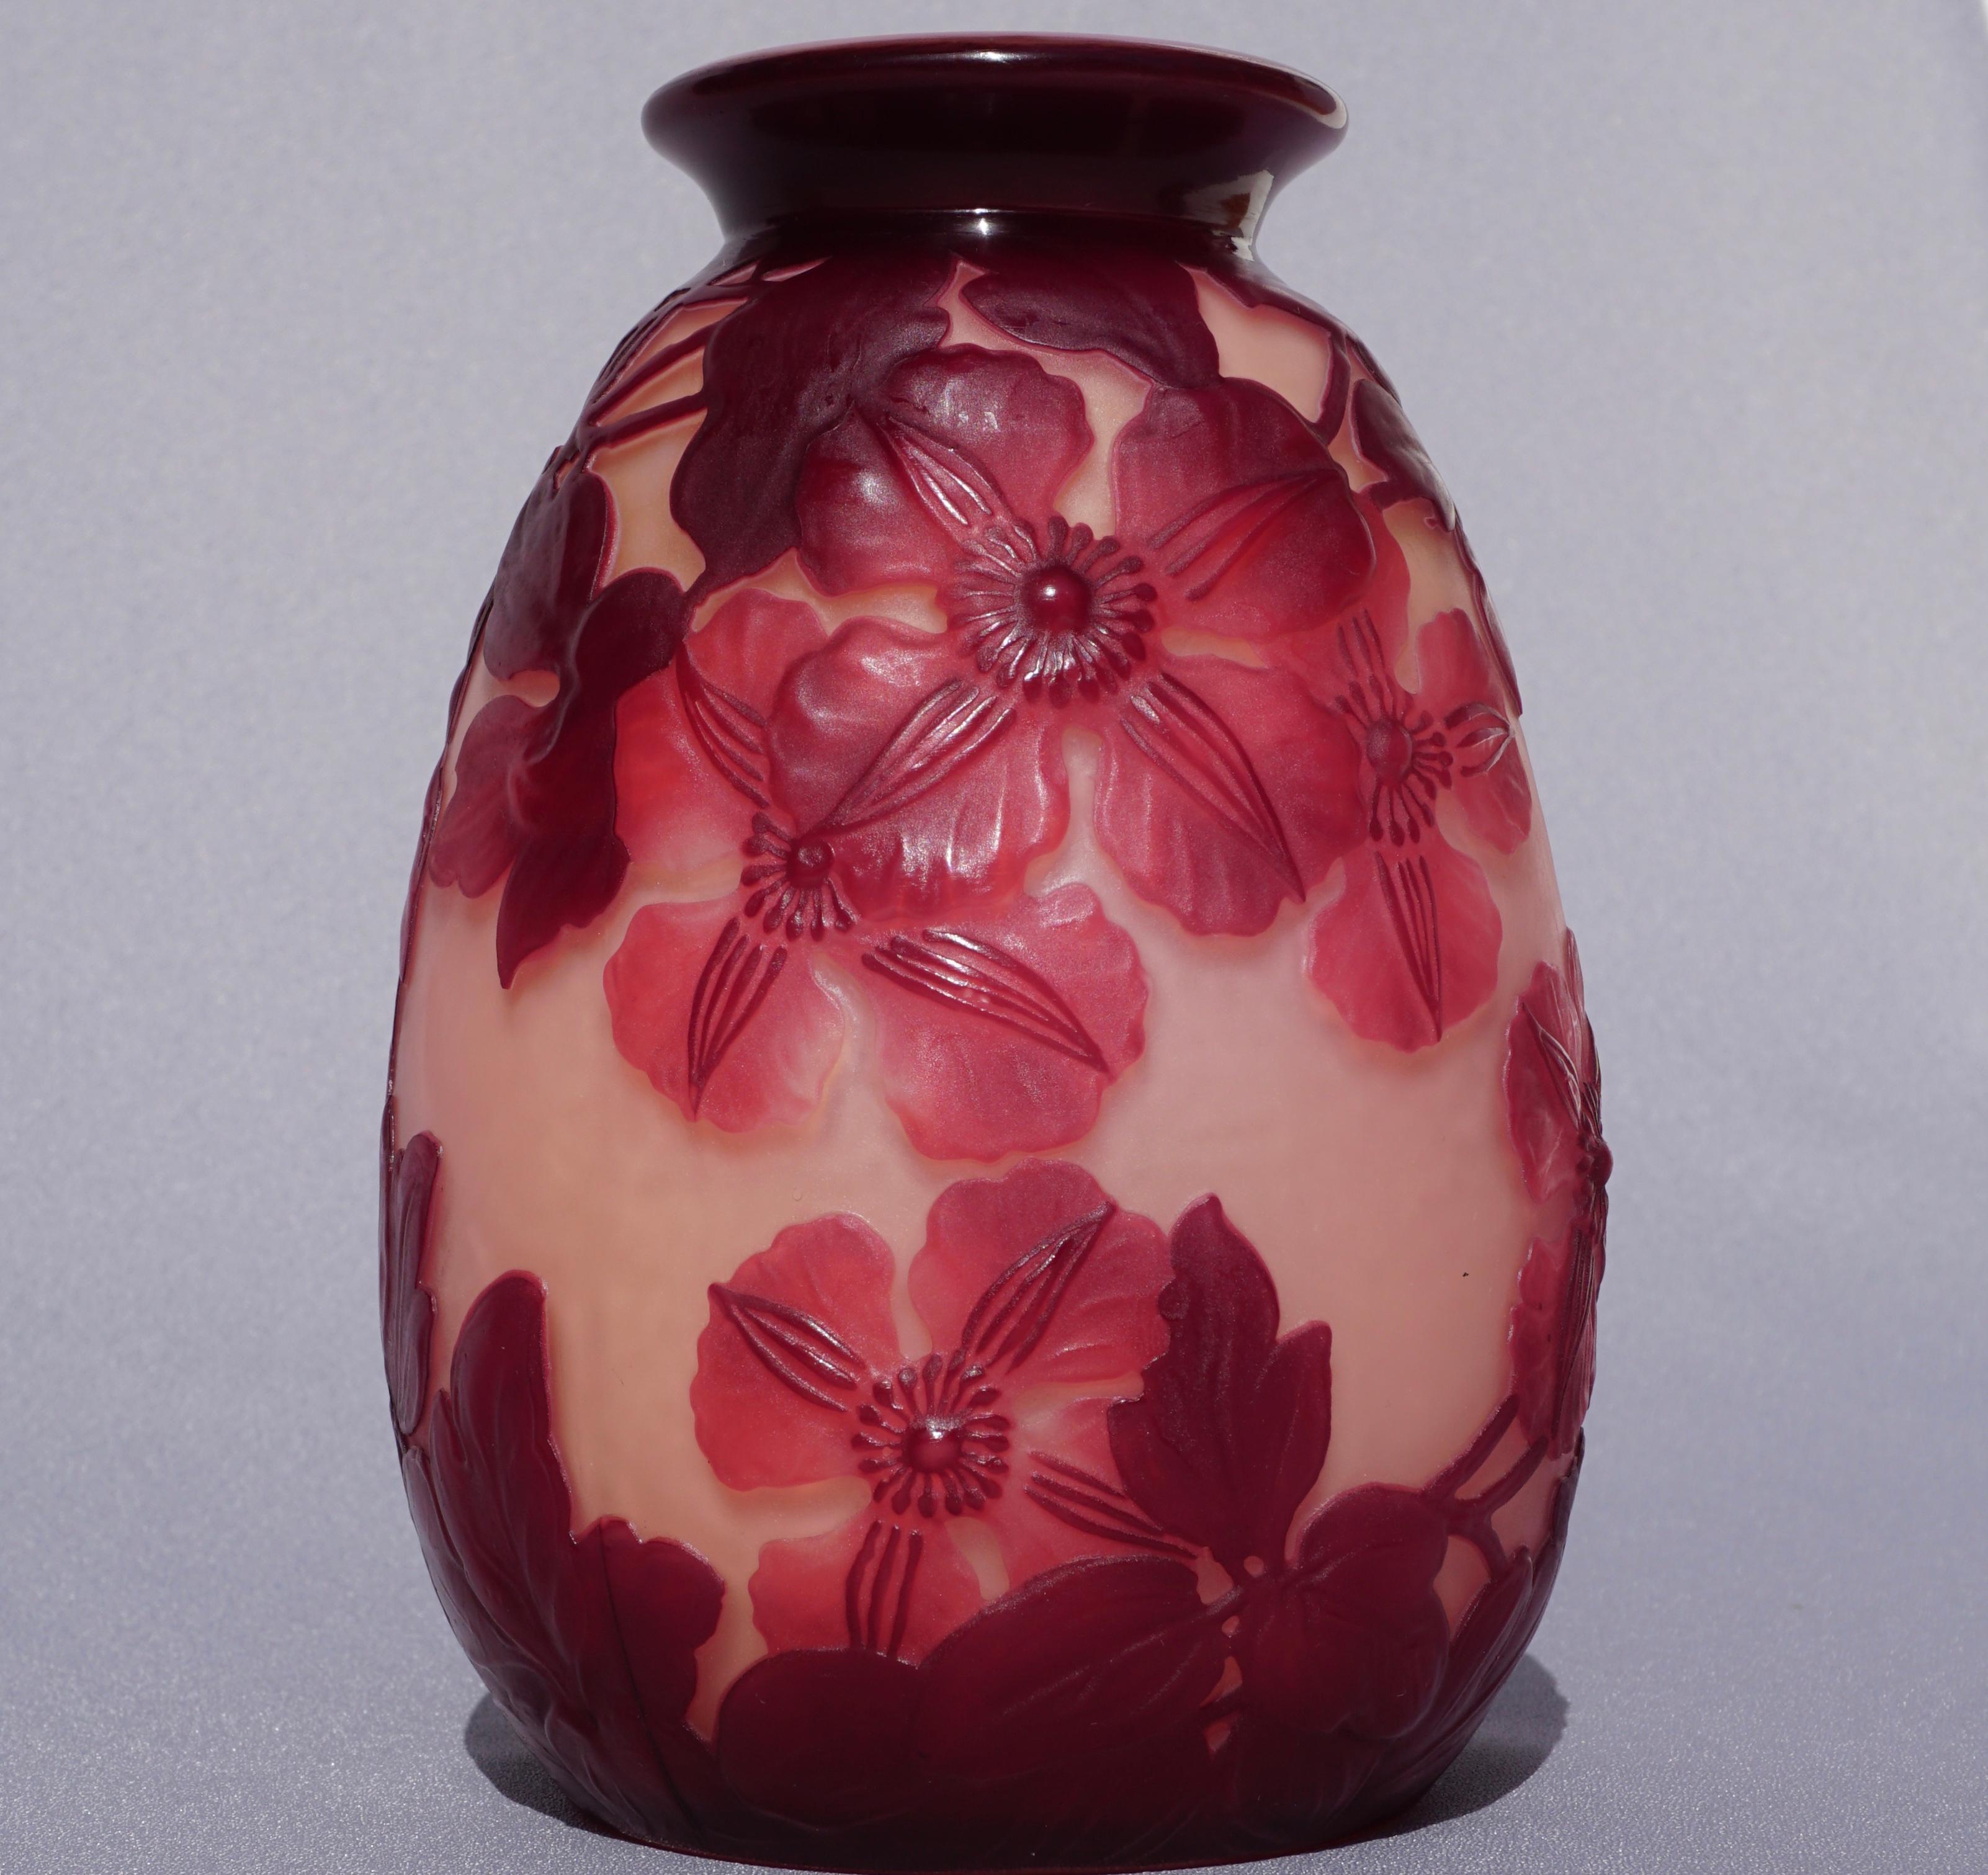 An Art Nouveau Emile Galle mold blown glass Clematis vase, circa 1900

This beautiful Gallé clematis blownout vase has a white layer below the two different red layers. This extra pink case layer is crucial. The vase 